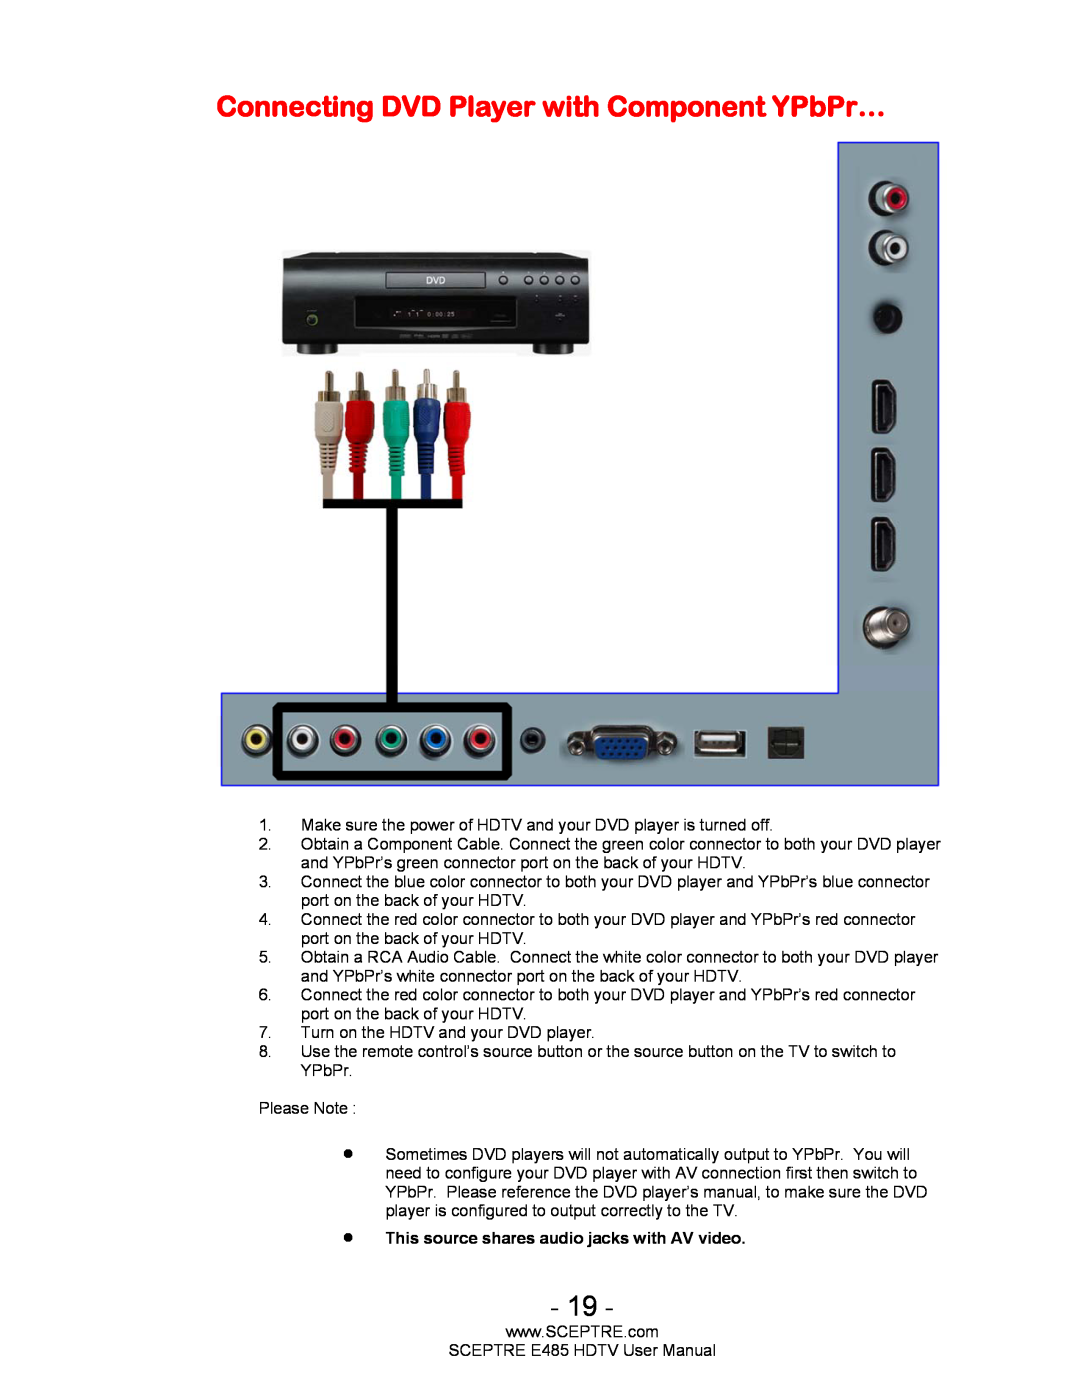 Sceptre Technologies E485 Connecting DVD Player with Component YPbPr…, This source shares audio jacks with AV video 